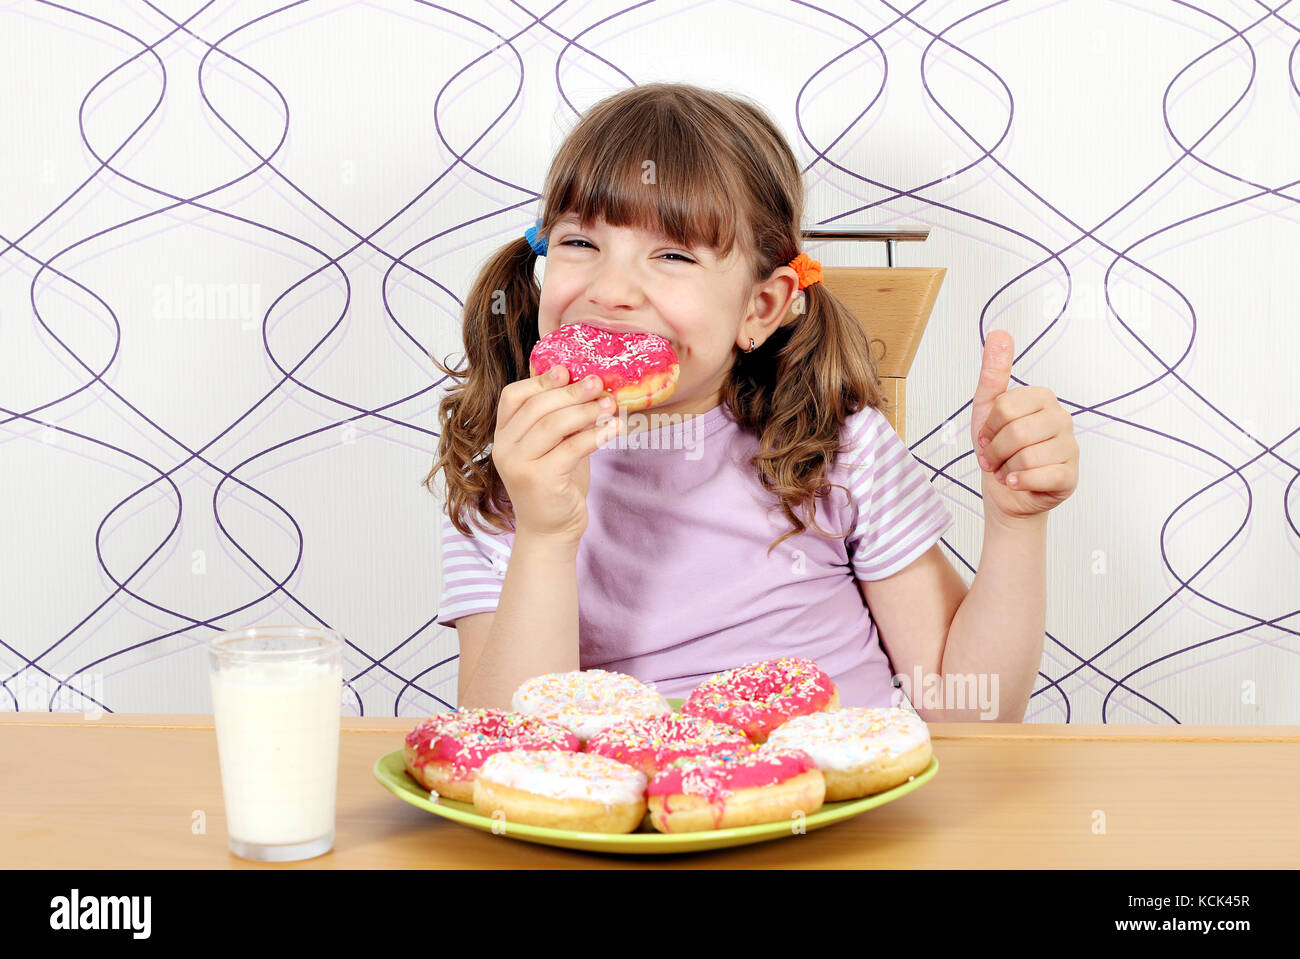 hungry little girl eat donuts Stock Photo